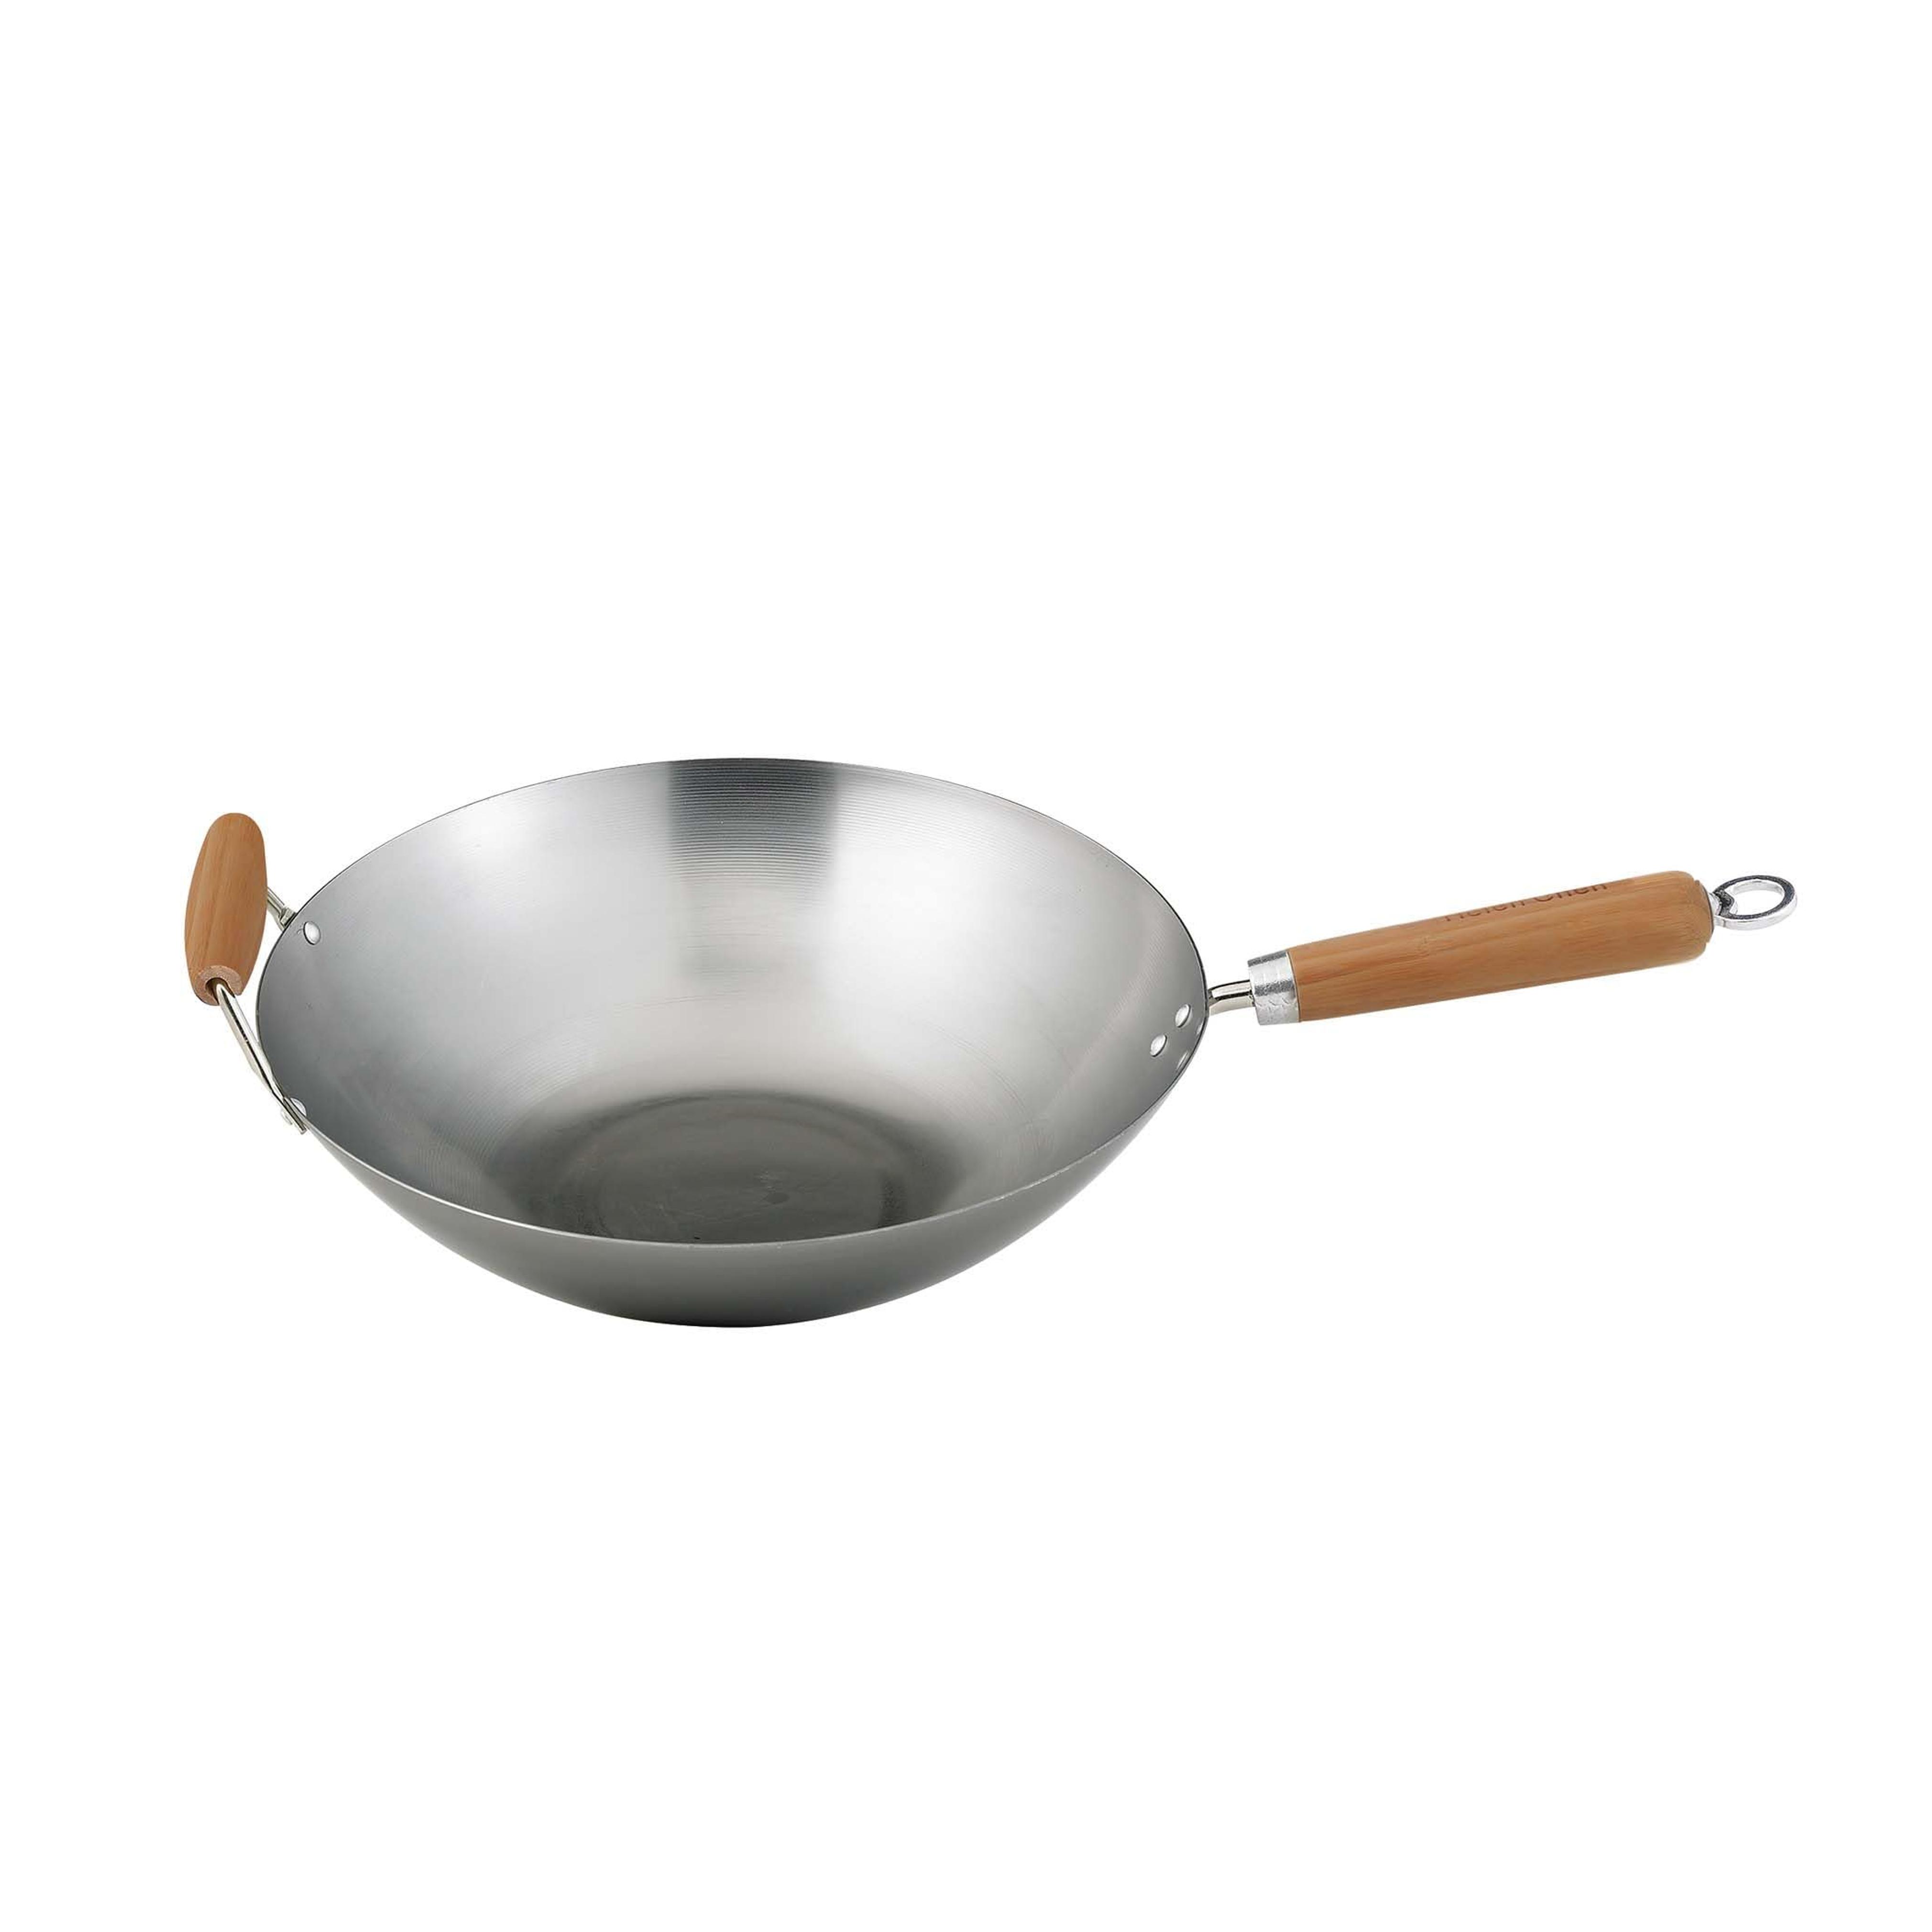 Helen Chen's Asian Kitchen 14-inch Carbon Steel Wok with Bamboo Handles